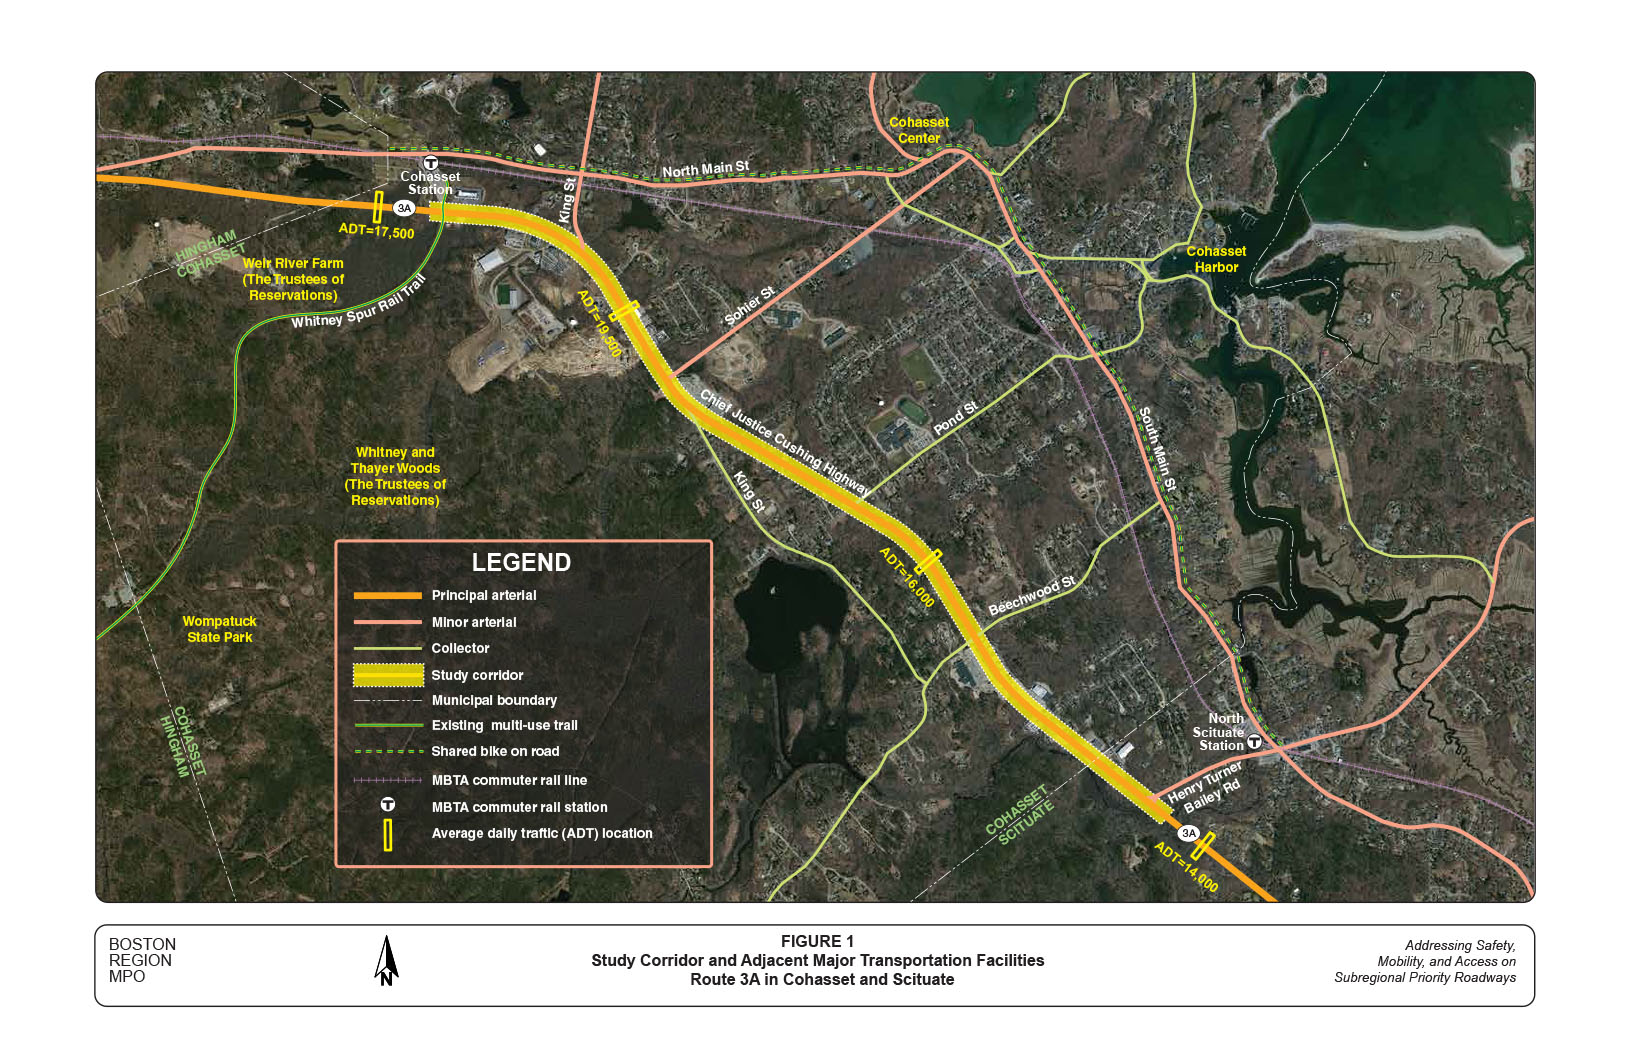 Figure 1 is an aerial view map that depicts the location of the study corridor (Route 3A in Cohasset and Scituate) along with major transportation facilities in the area.